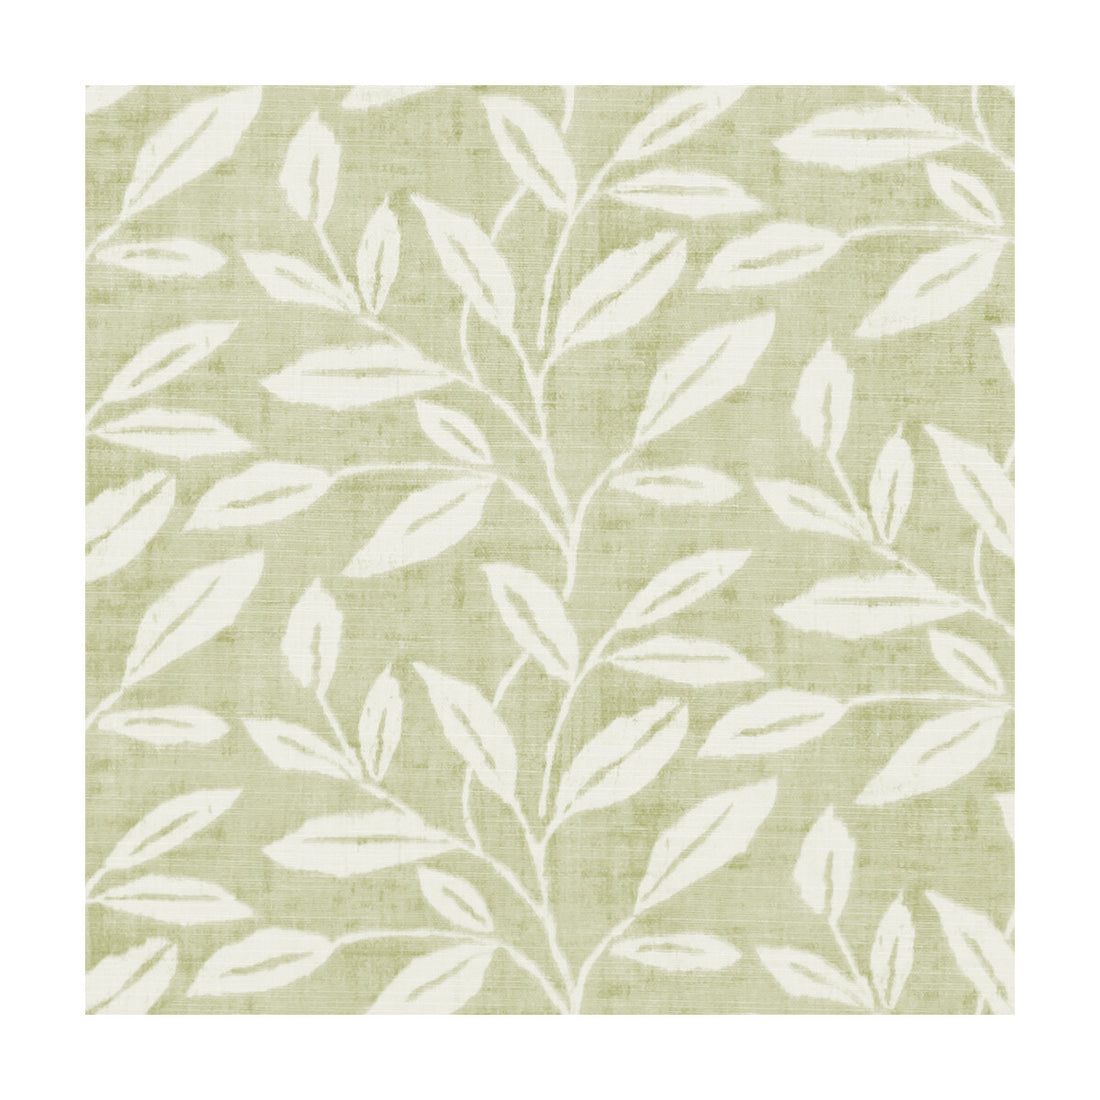 Terrace Trail fabric in sage color - pattern F1236/04.CAC.0 - by Clarke And Clarke in the Roof Garden By Studio G For C&amp;C collection